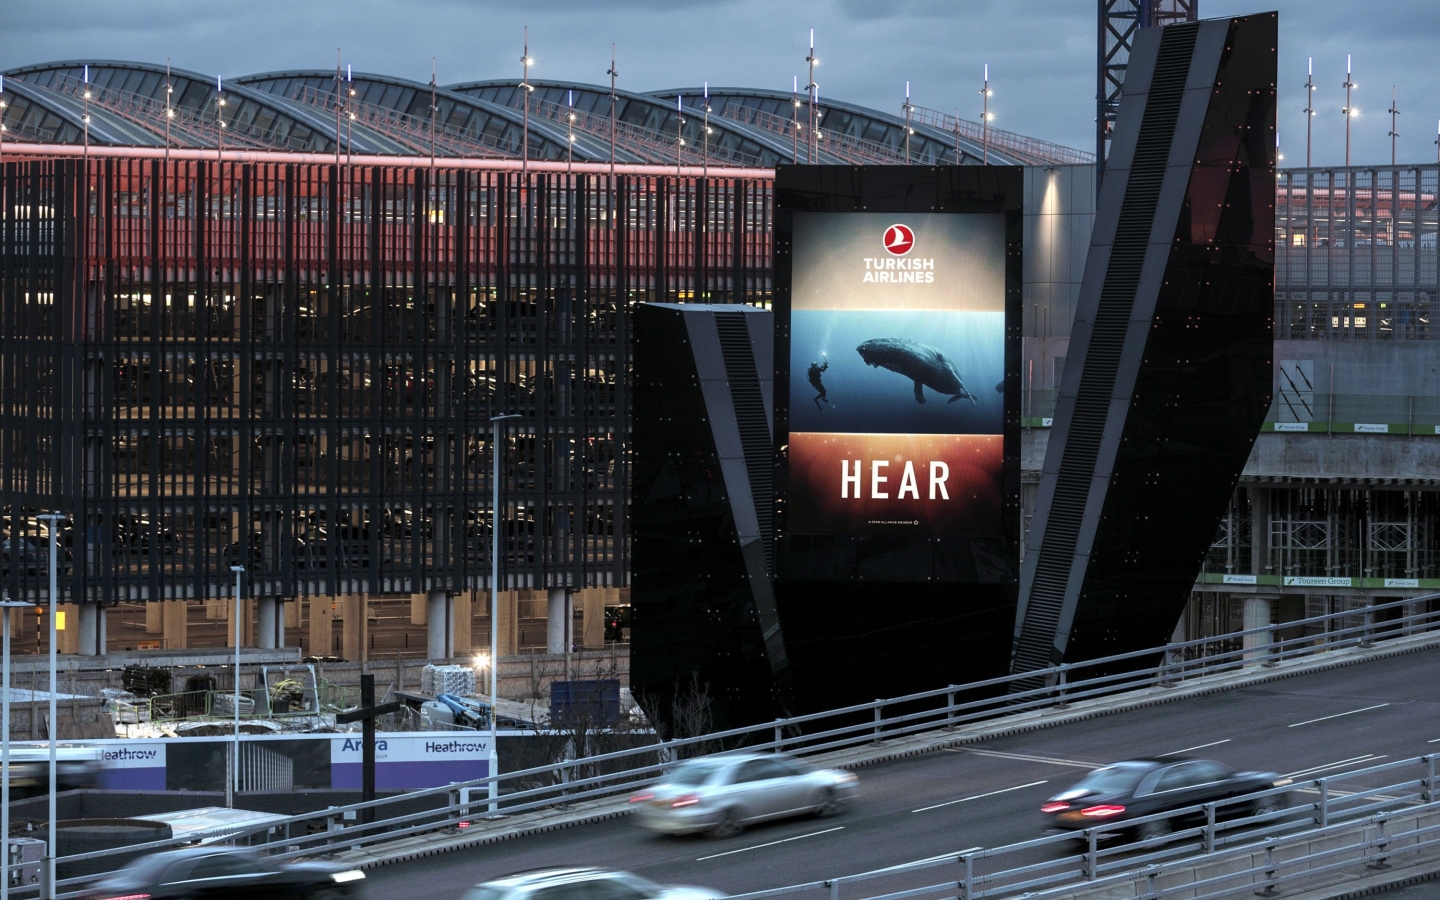 10 Reasons Why Airport Advertising Works, Turksih Airlines campaign, Heathrow Airport